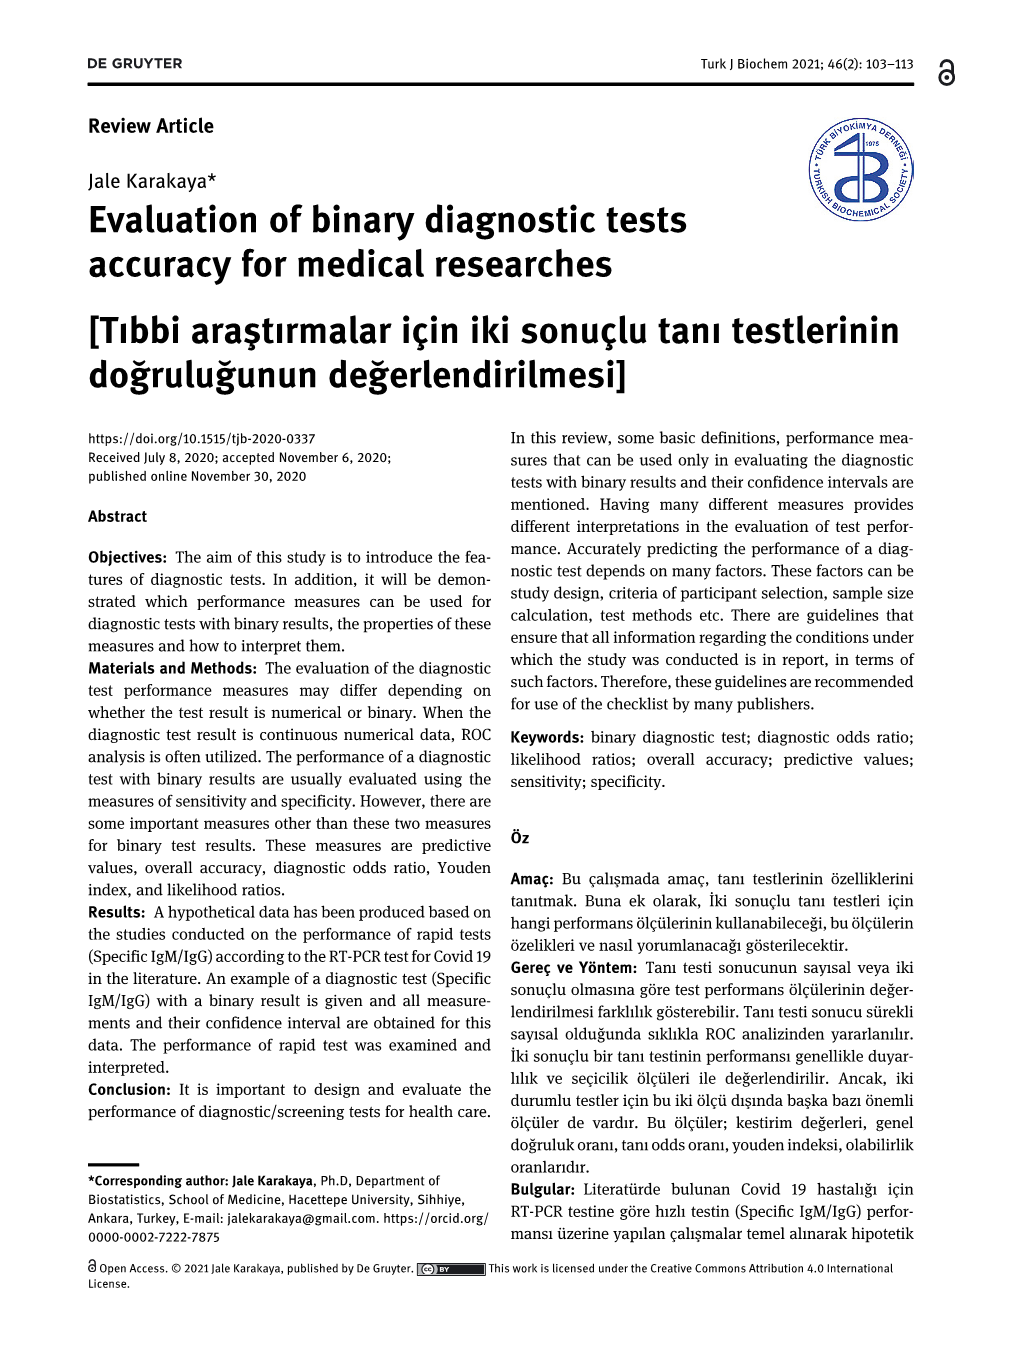 Evaluation of Binary Diagnostic Tests Accuracy for Medical Researches